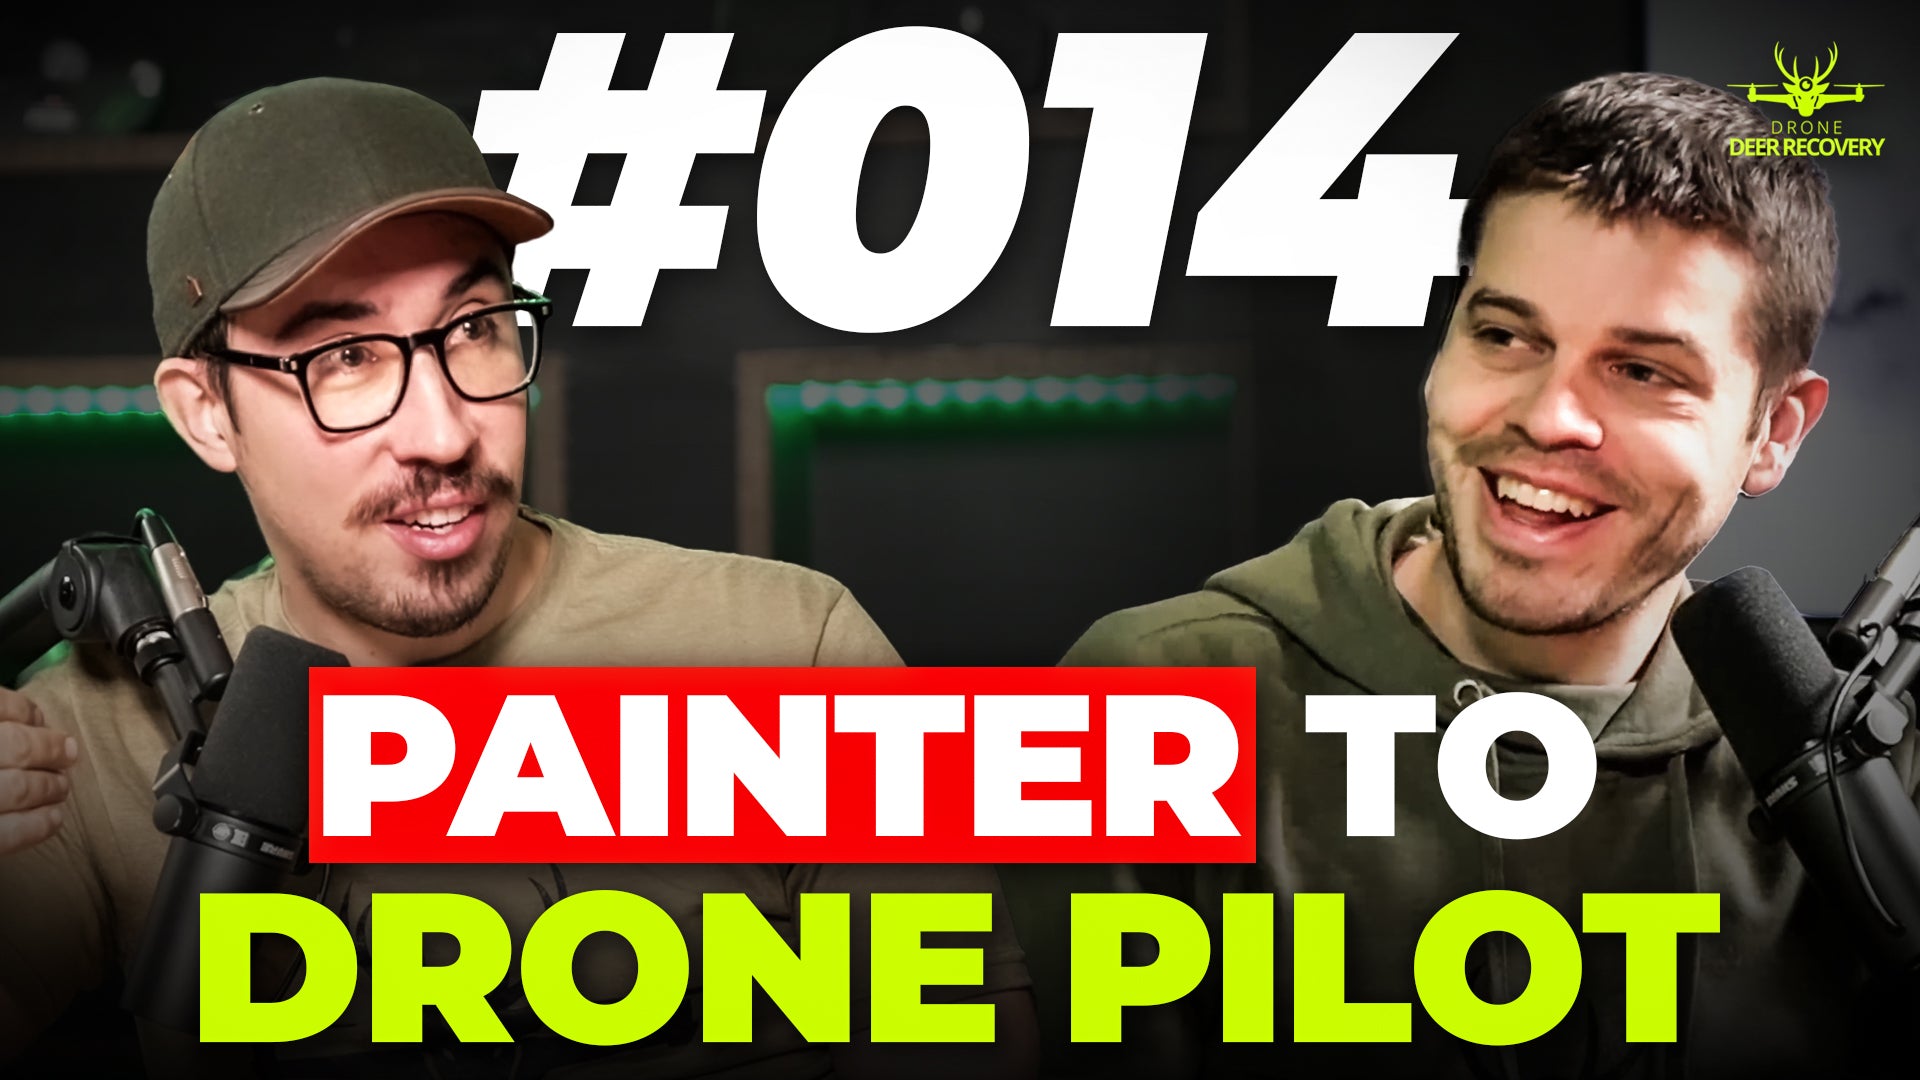 Can You Really Be a Full-Time Drone Pilot? | DDR Podcast 14